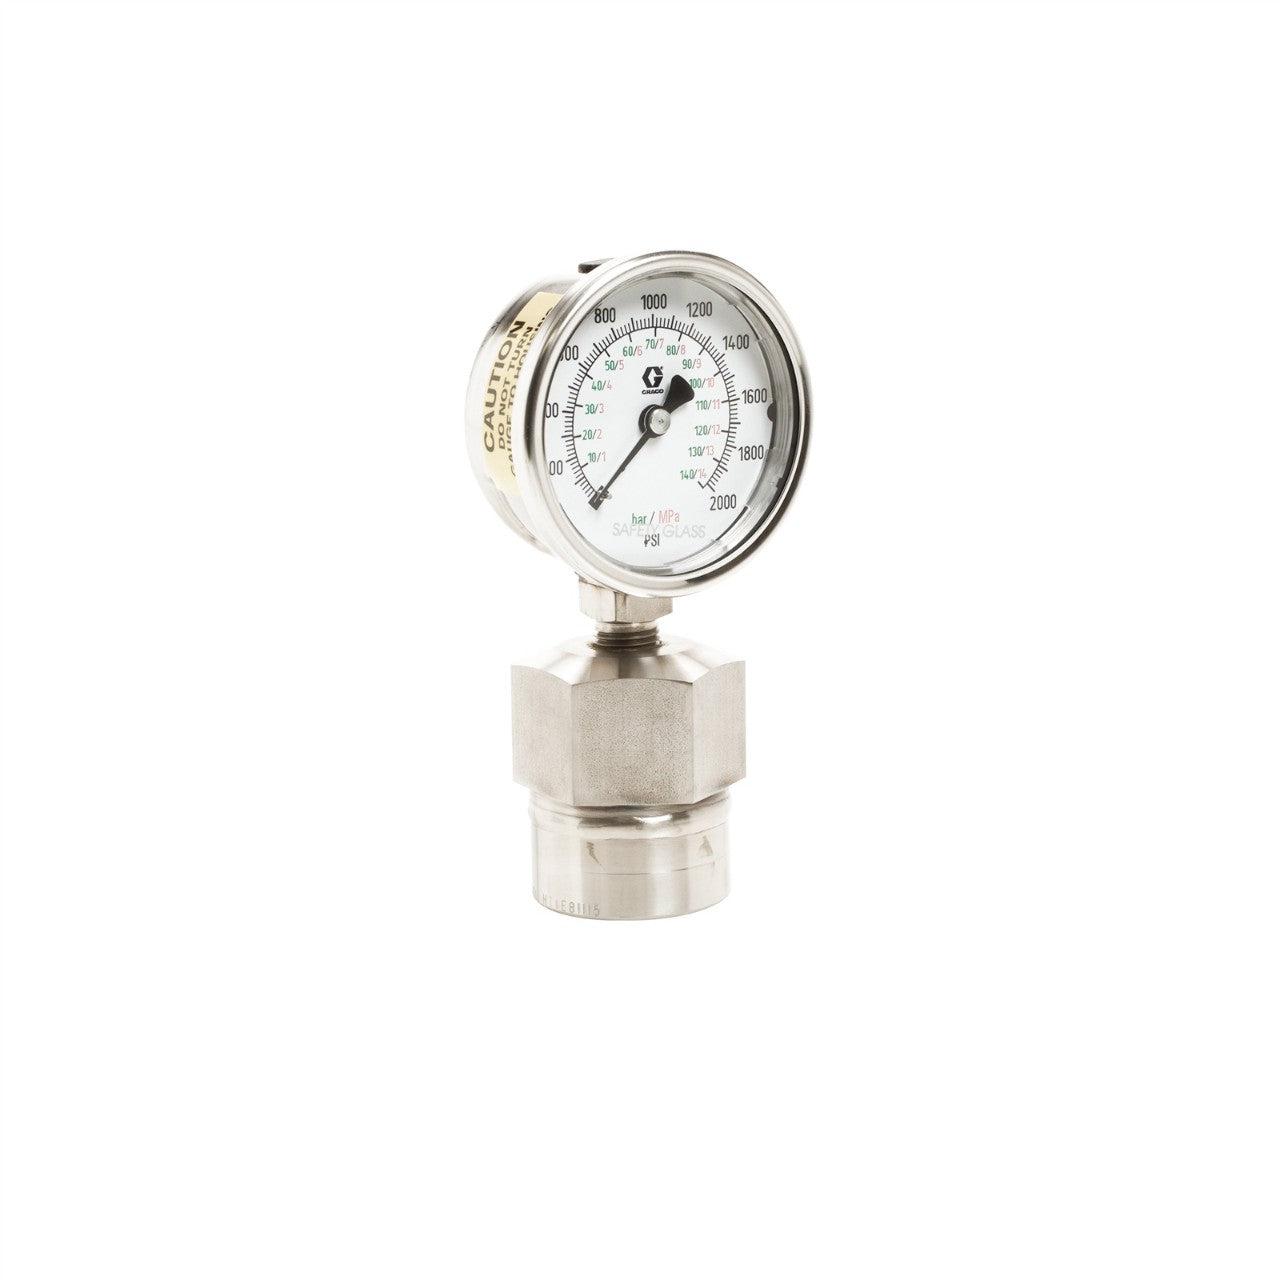 Stainless Steel Fluid Gauges with Dampeners, 0-2000 psi (0-140 bar) 1/4 in npt(f)